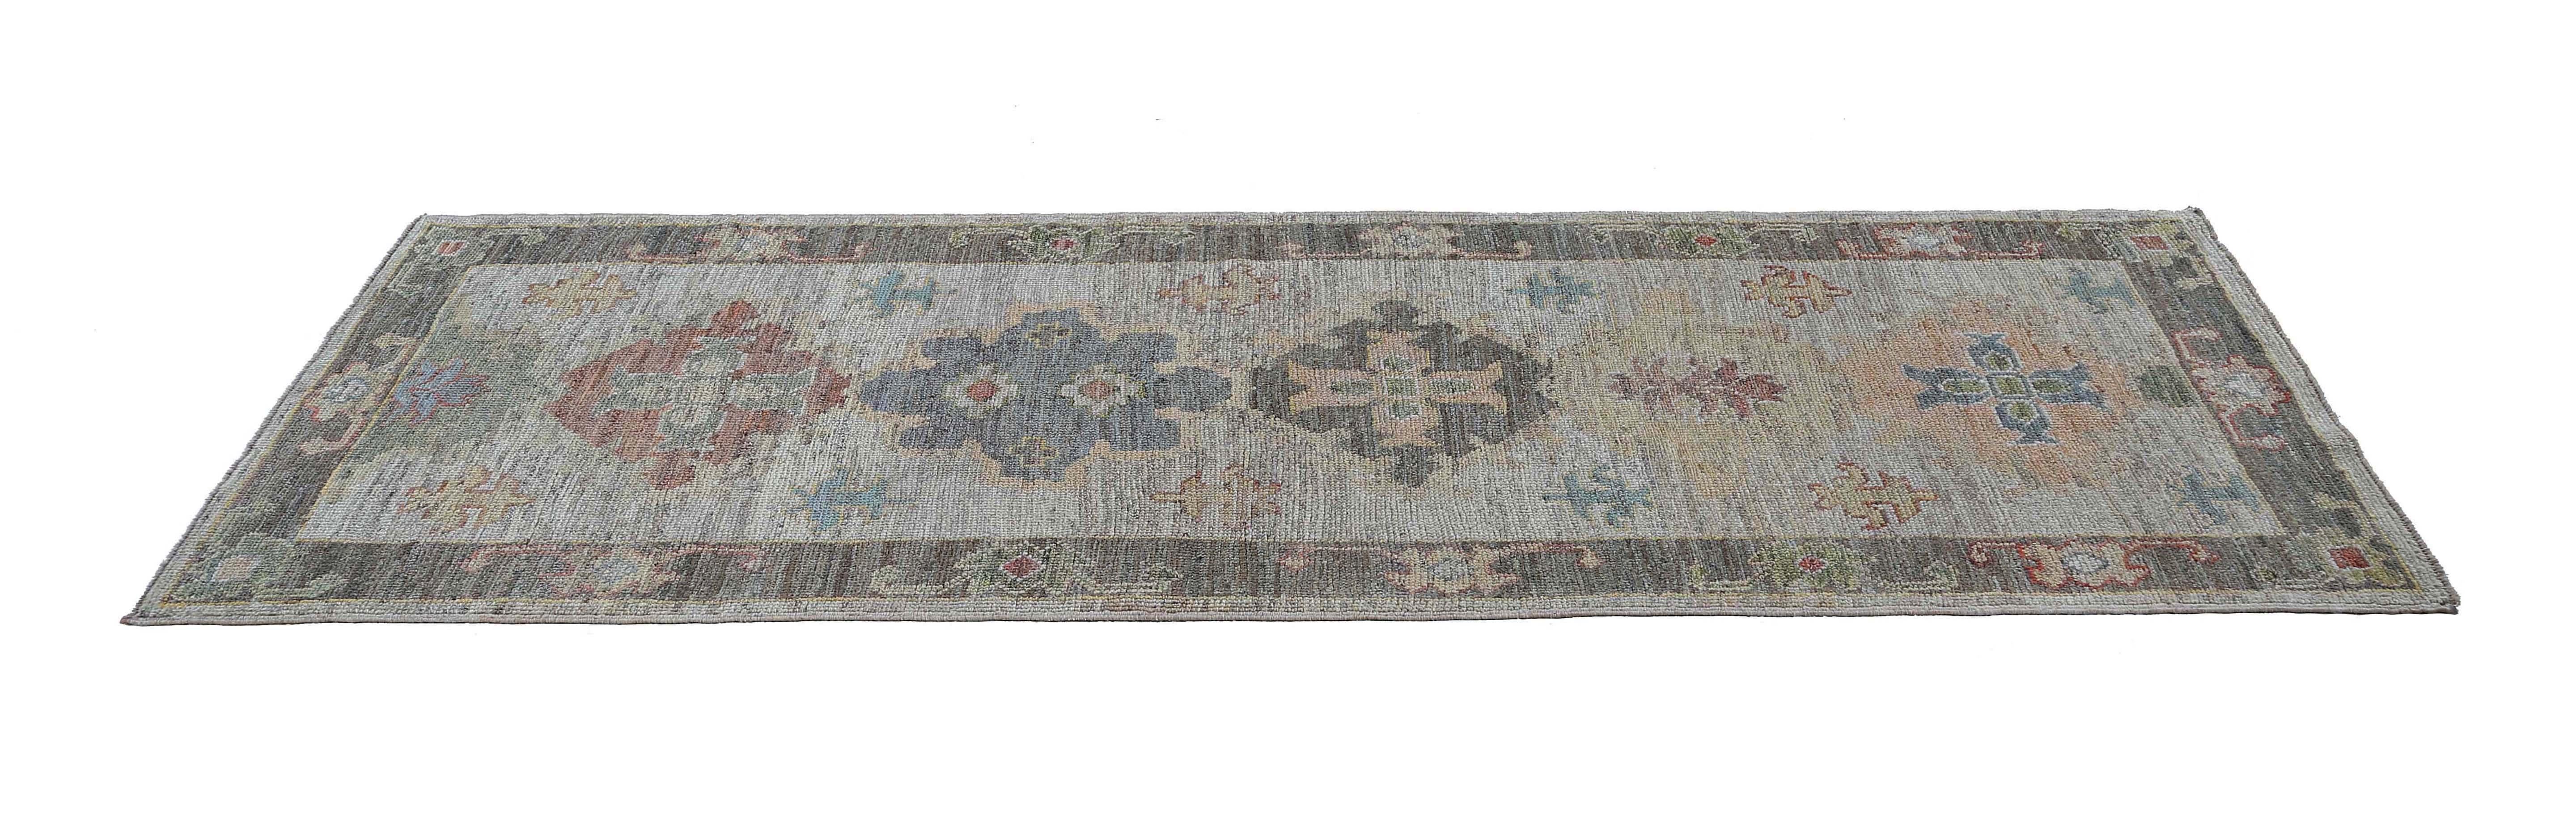 Hand-Woven New Oushak Runner with Colorful Tones For Sale